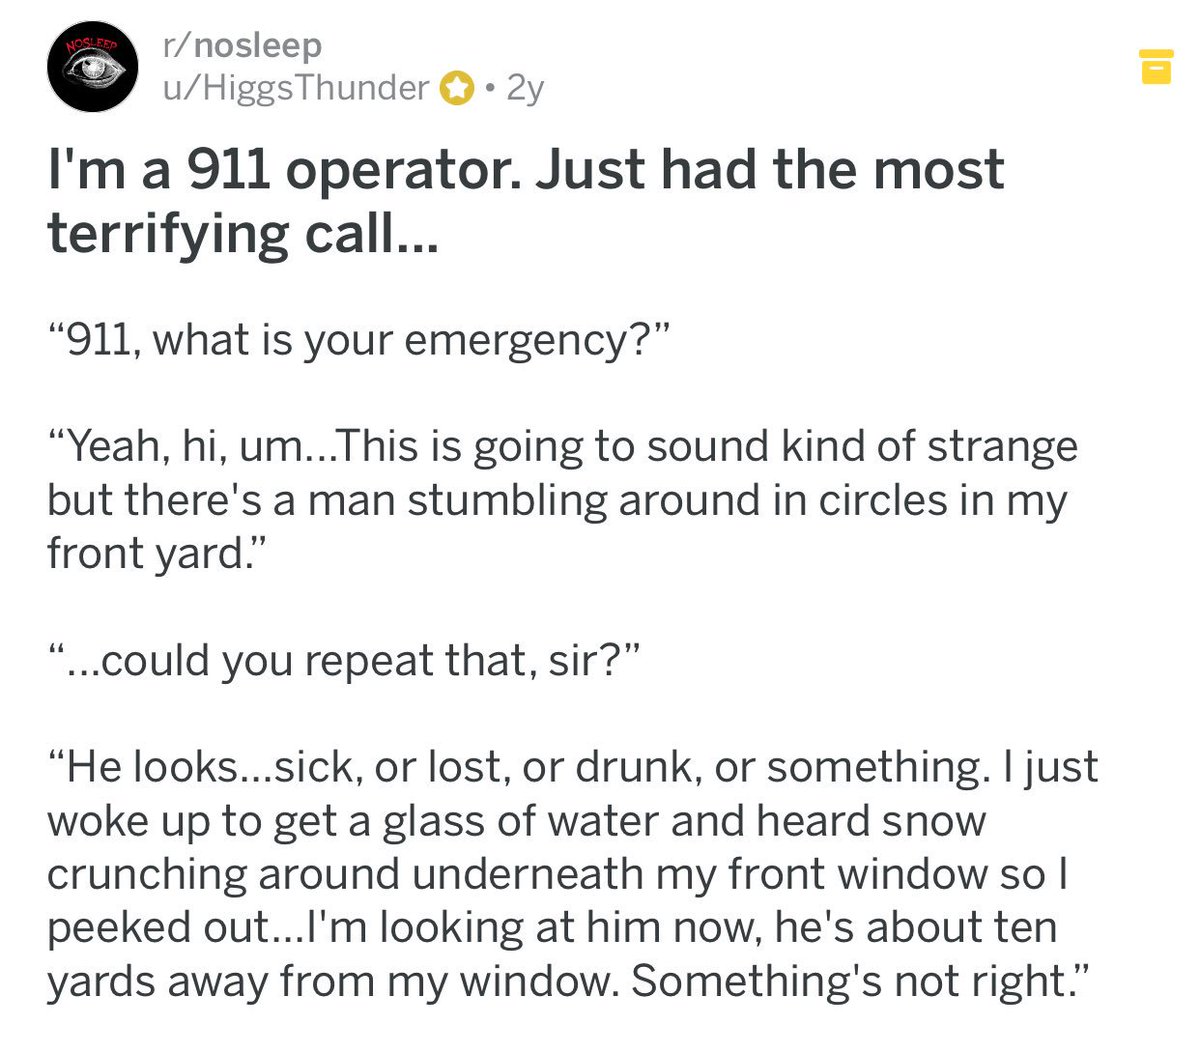 ↳ I’m a 911 operator. Just had the most terrifying call...{ https://www.reddit.com/r/nosleep/comments/2v9wwn/im_a_911_operator_just_had_the_most_terrifying/}